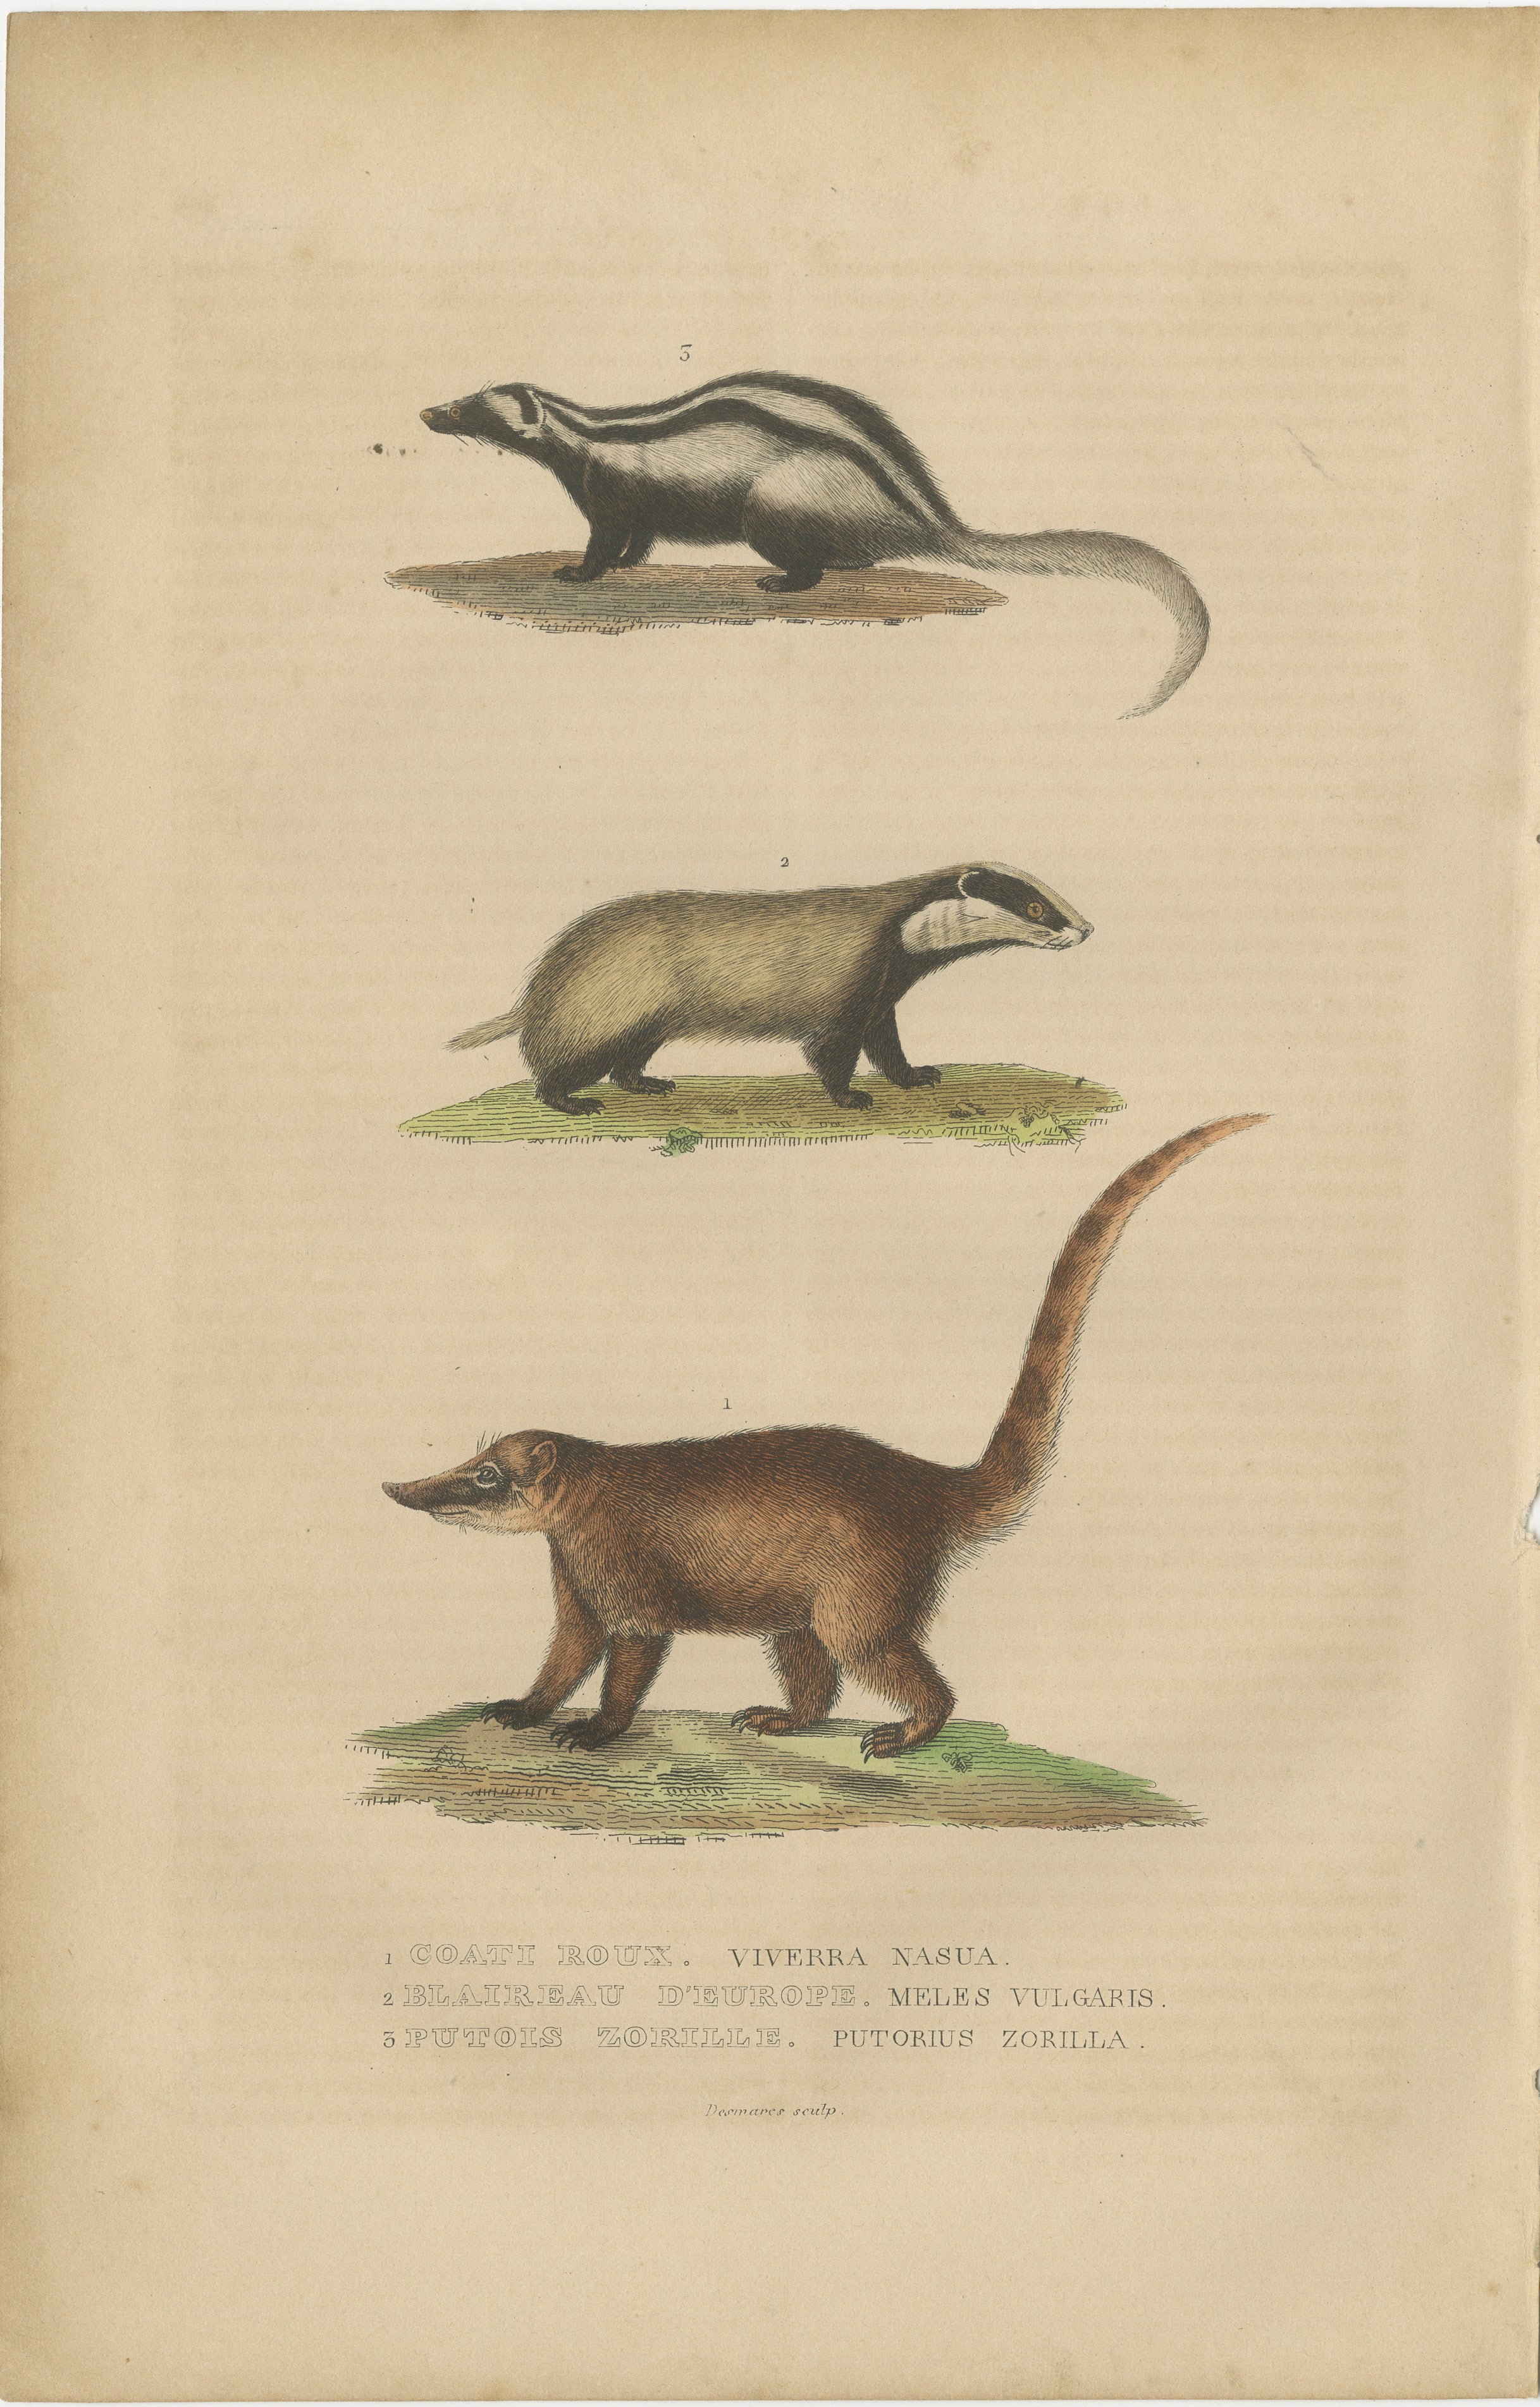 The image is a hand-colored engraving from the 'Dictionnaire Classique des Sciences Naturelles' by Pierre Auguste Joseph Drapiez, published in 1845. It features three species of small to medium-sized mammals:

1. **Viverra nasua** - This is likely